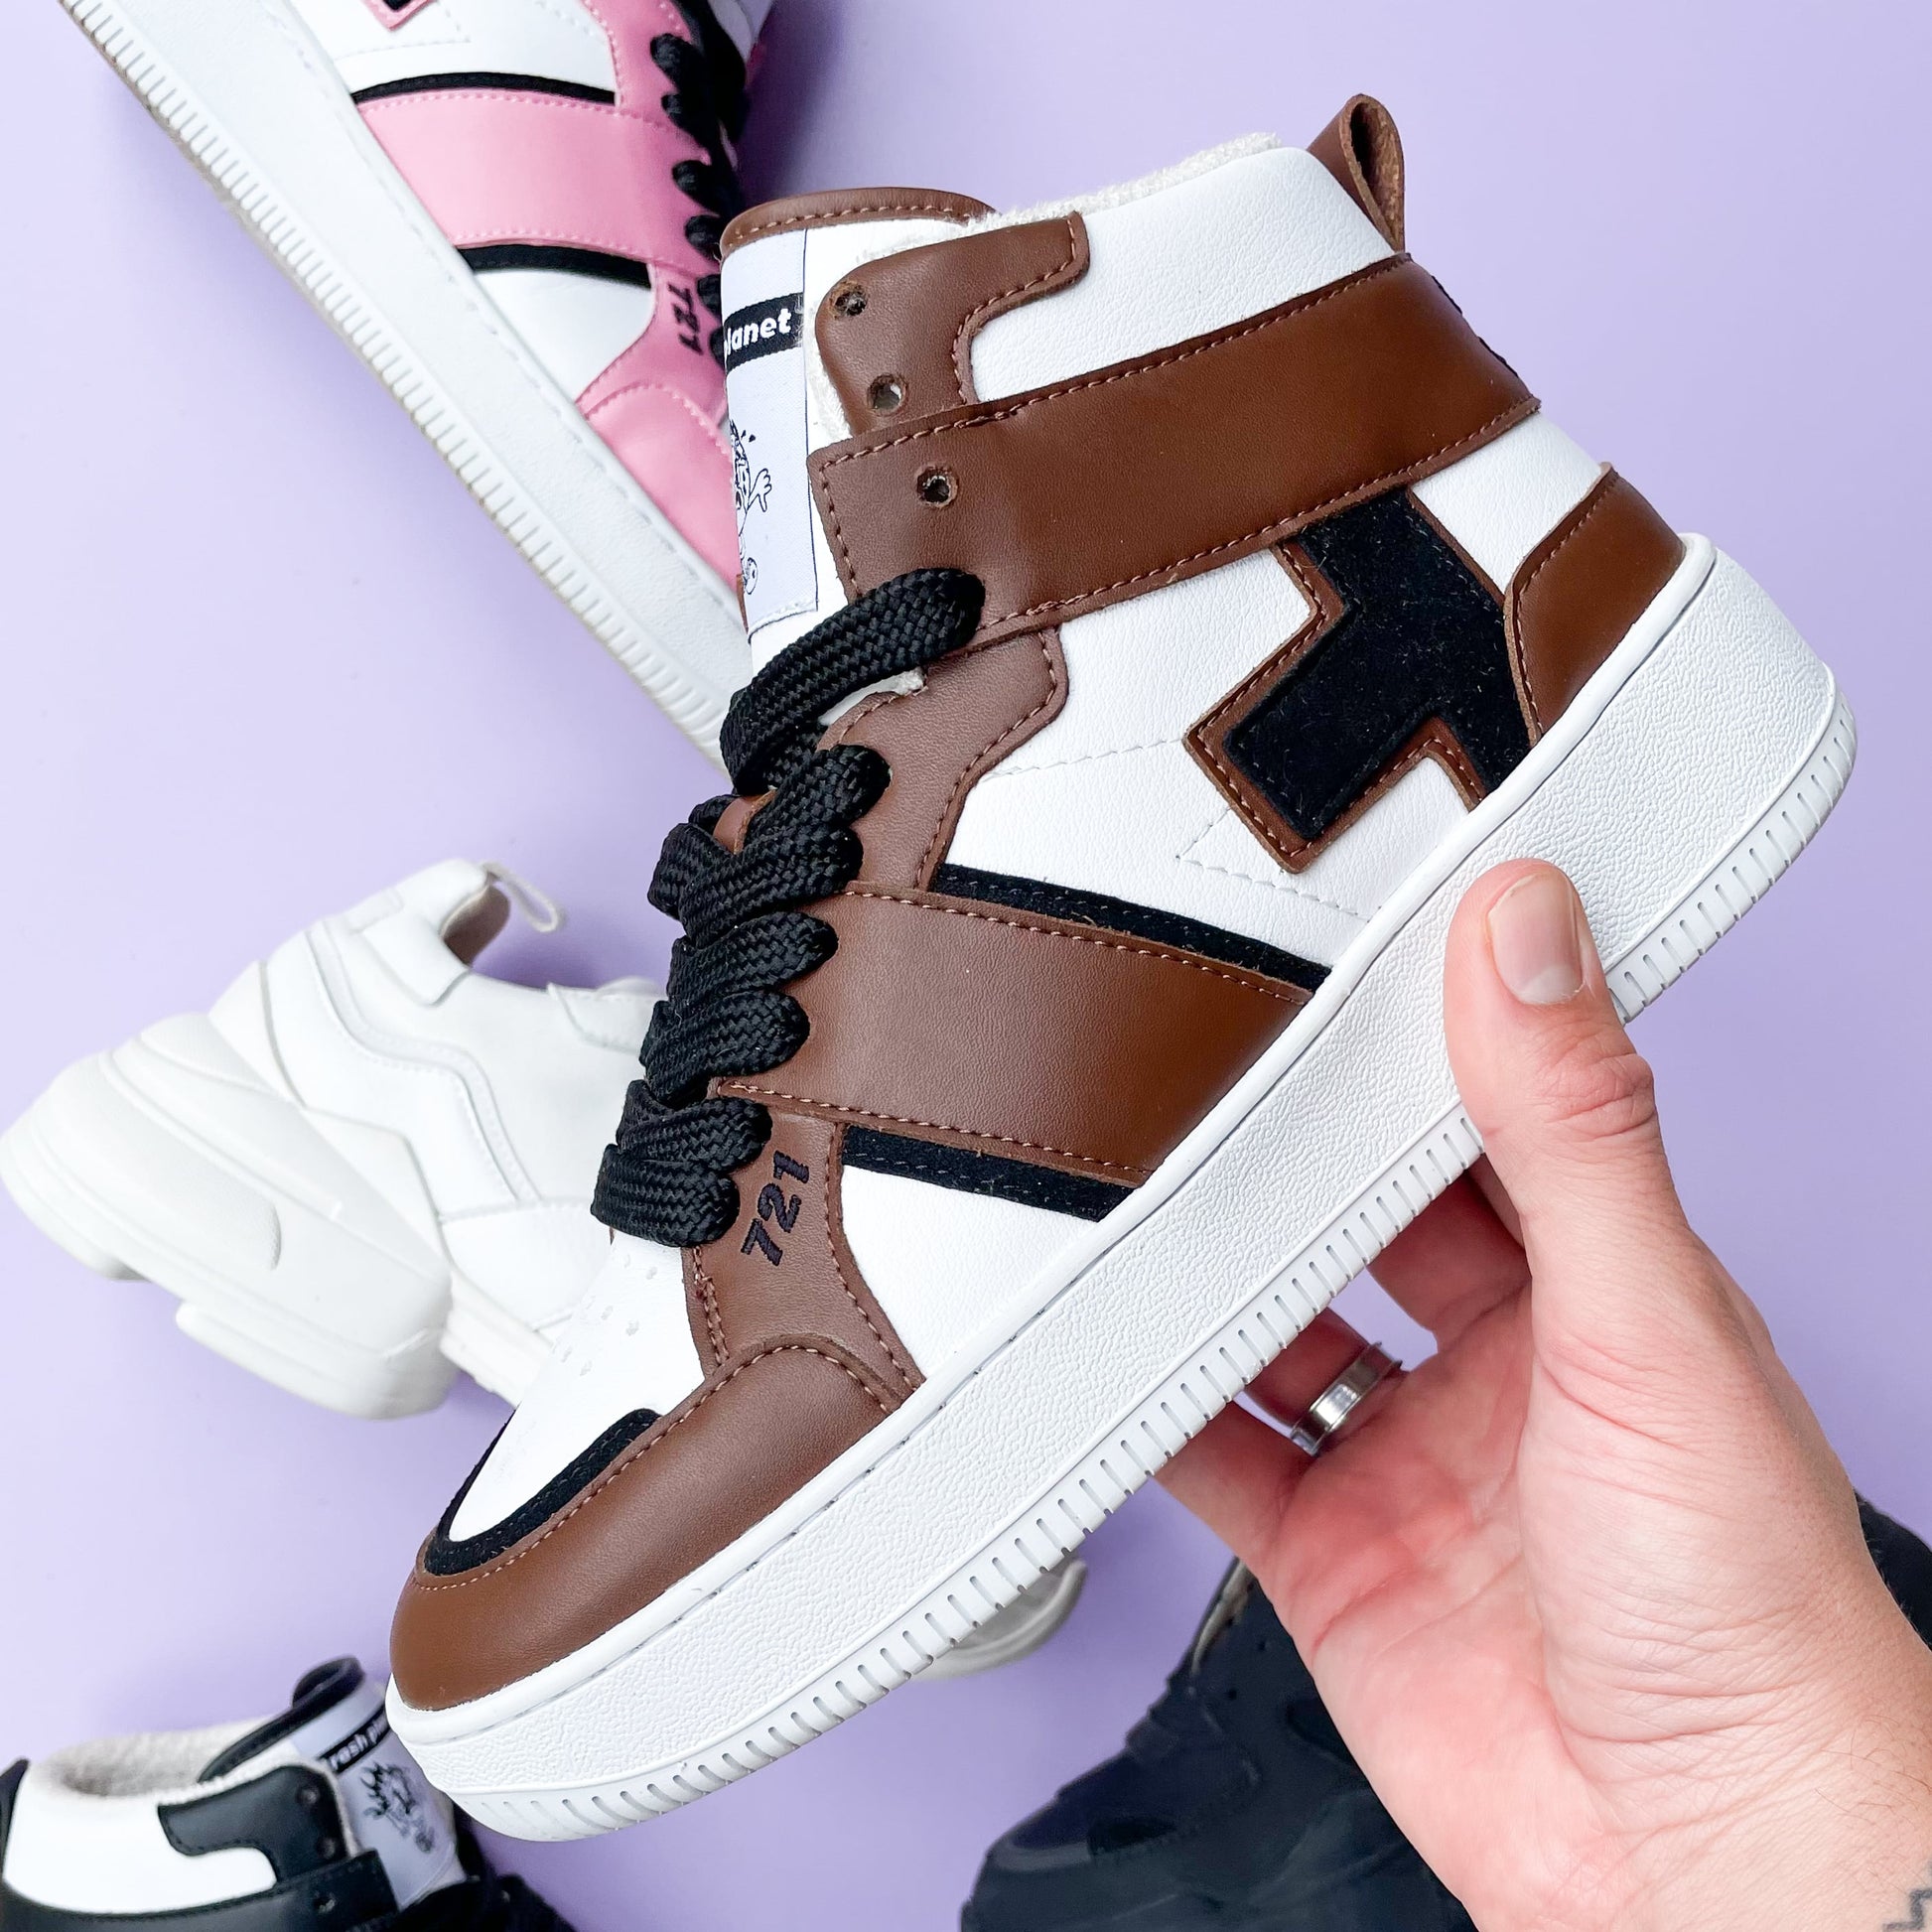 A hand holds out a dark brown vegan high-top sneaker with streetwear style black and white details, which is made with recycled trash against a pastel lilac background.